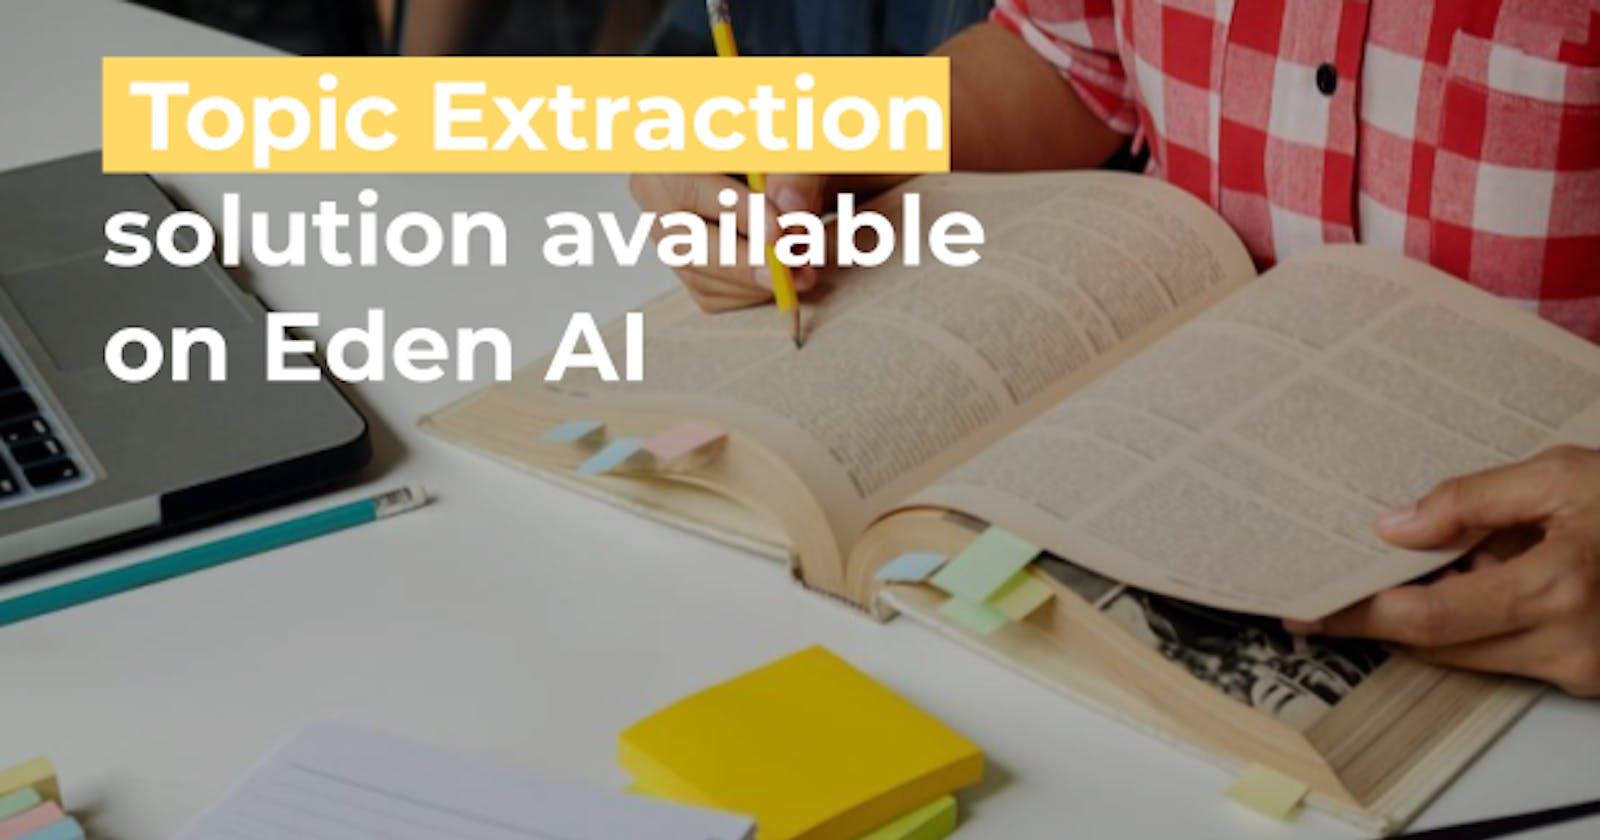 NEW: Topic/Entity Extraction feature available on Eden AI